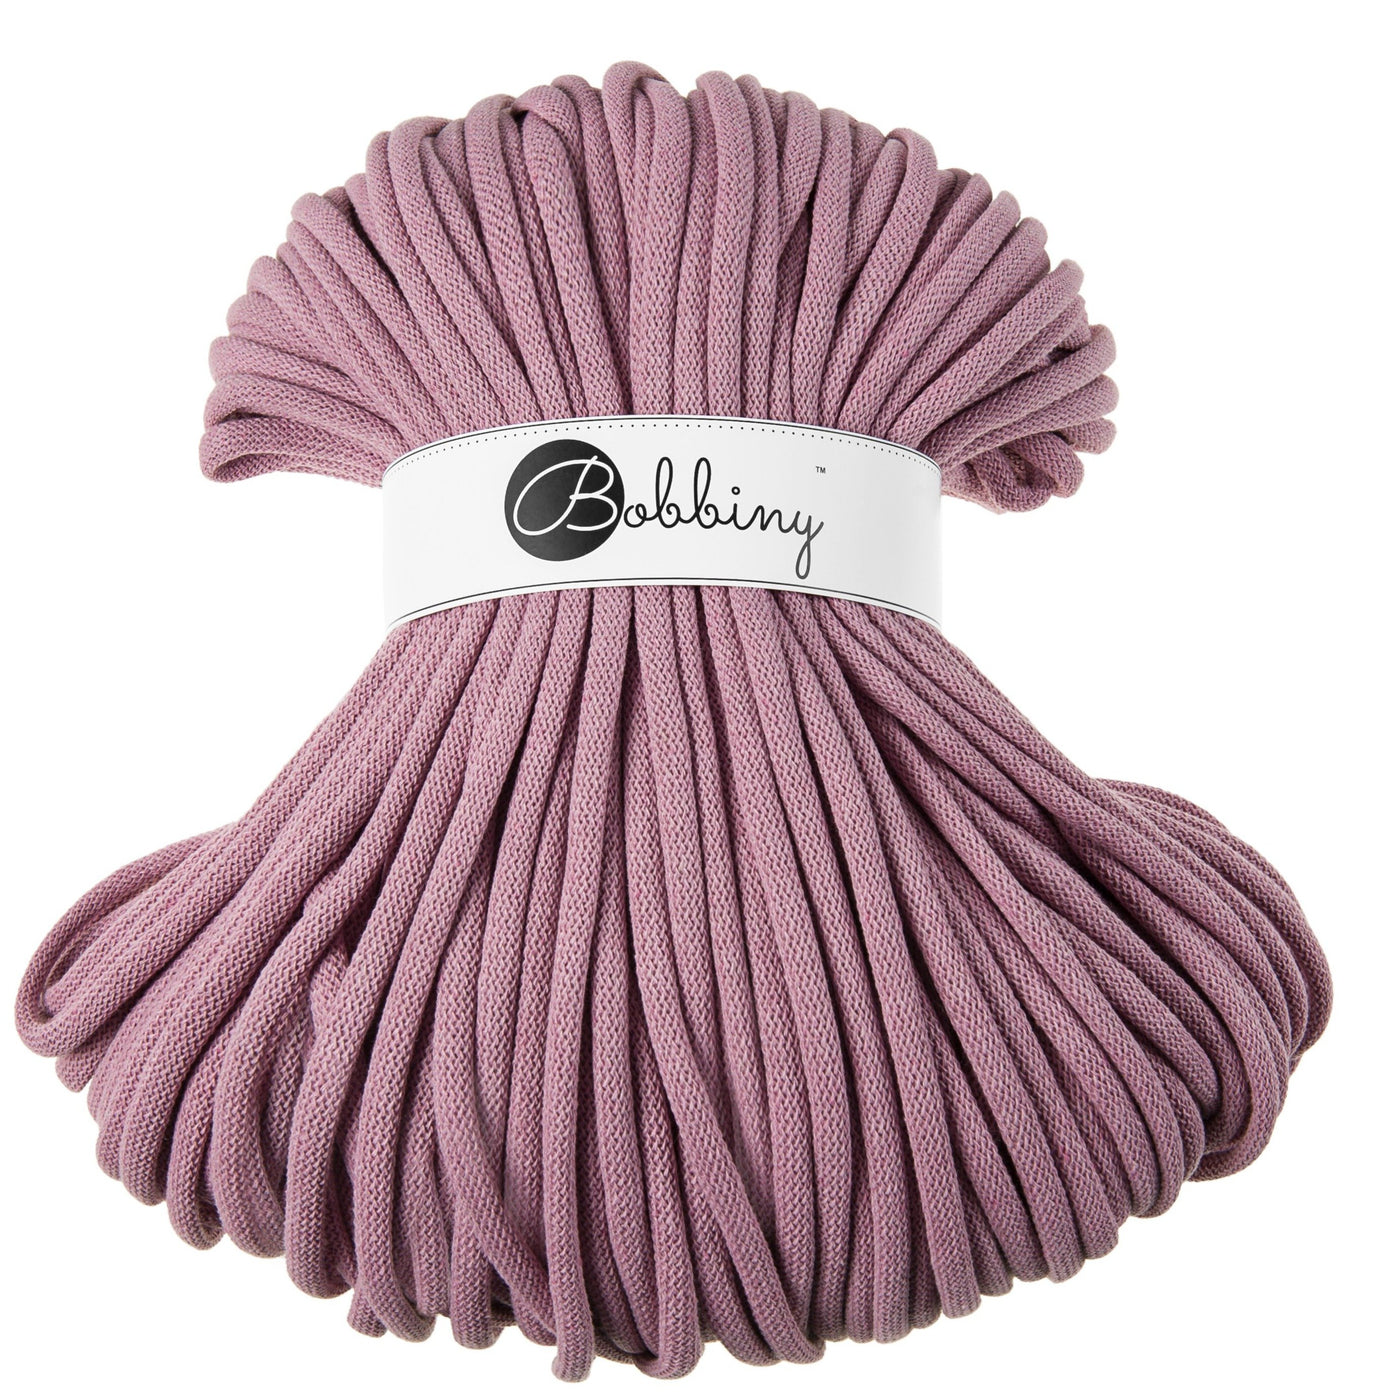 Where can I find Bobbiny Braided Cords Bobbiny Jumbo 9mm - 100m Dusty Pink? These gorgeous Bobbiny Ropes are made in Poland from 100% recycled cottons and are non toxic and certified safe for children. 9mm Diameter Length 100m Recommended for use with 14-16mm crochet hooks or knitting needles. Perfect for use with Macrame, Crochet or Knitting.